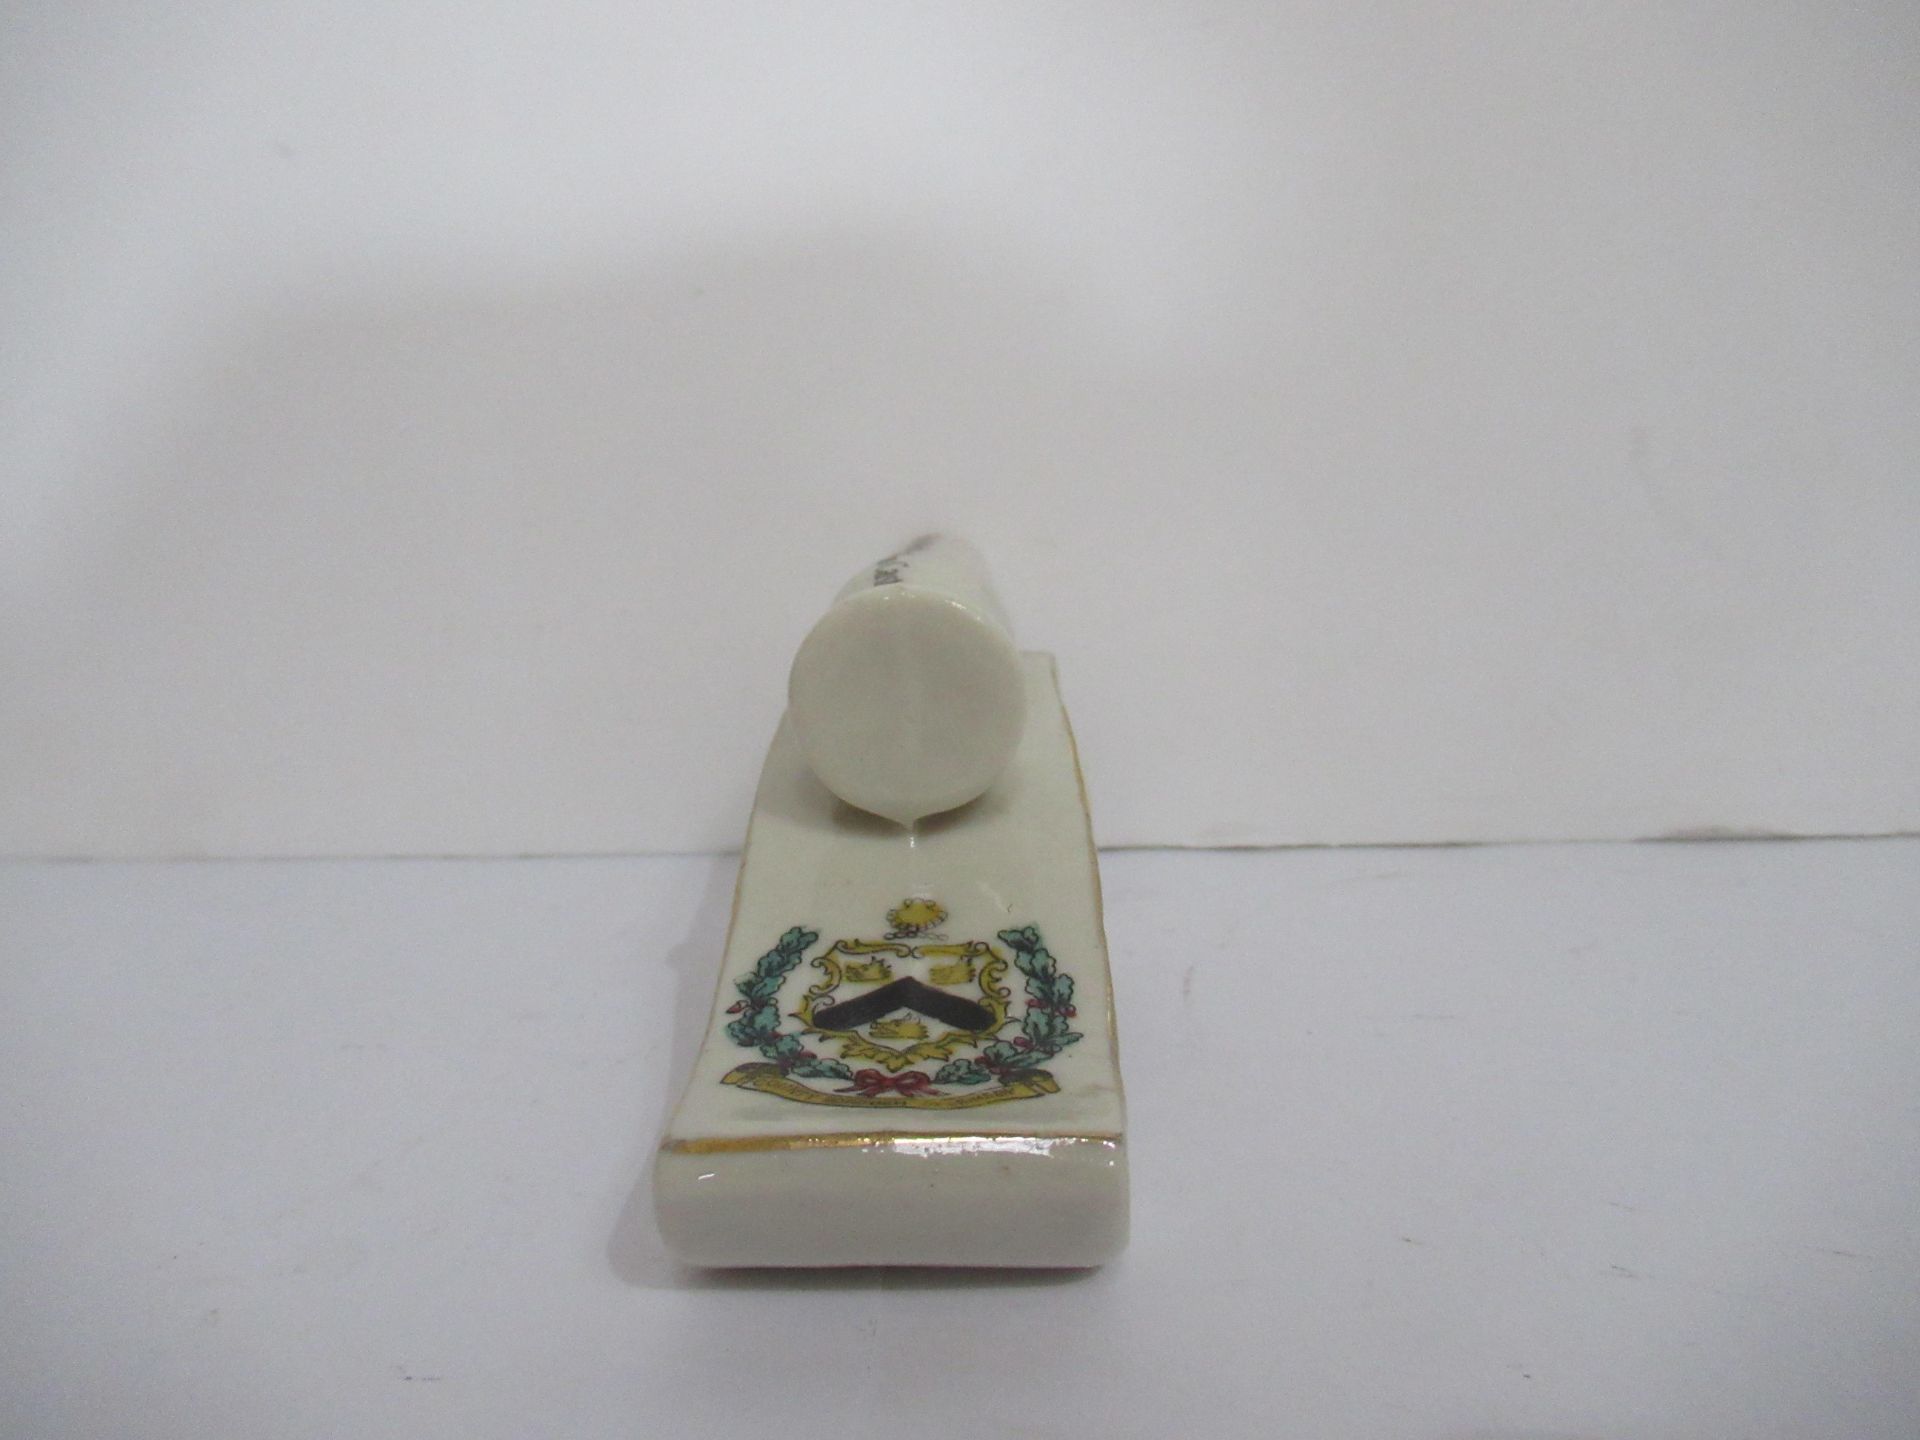 Crested China Waterfall Heraldic model of canon with Grimsby coat of arms (120mm x 30mm) - Image 4 of 8